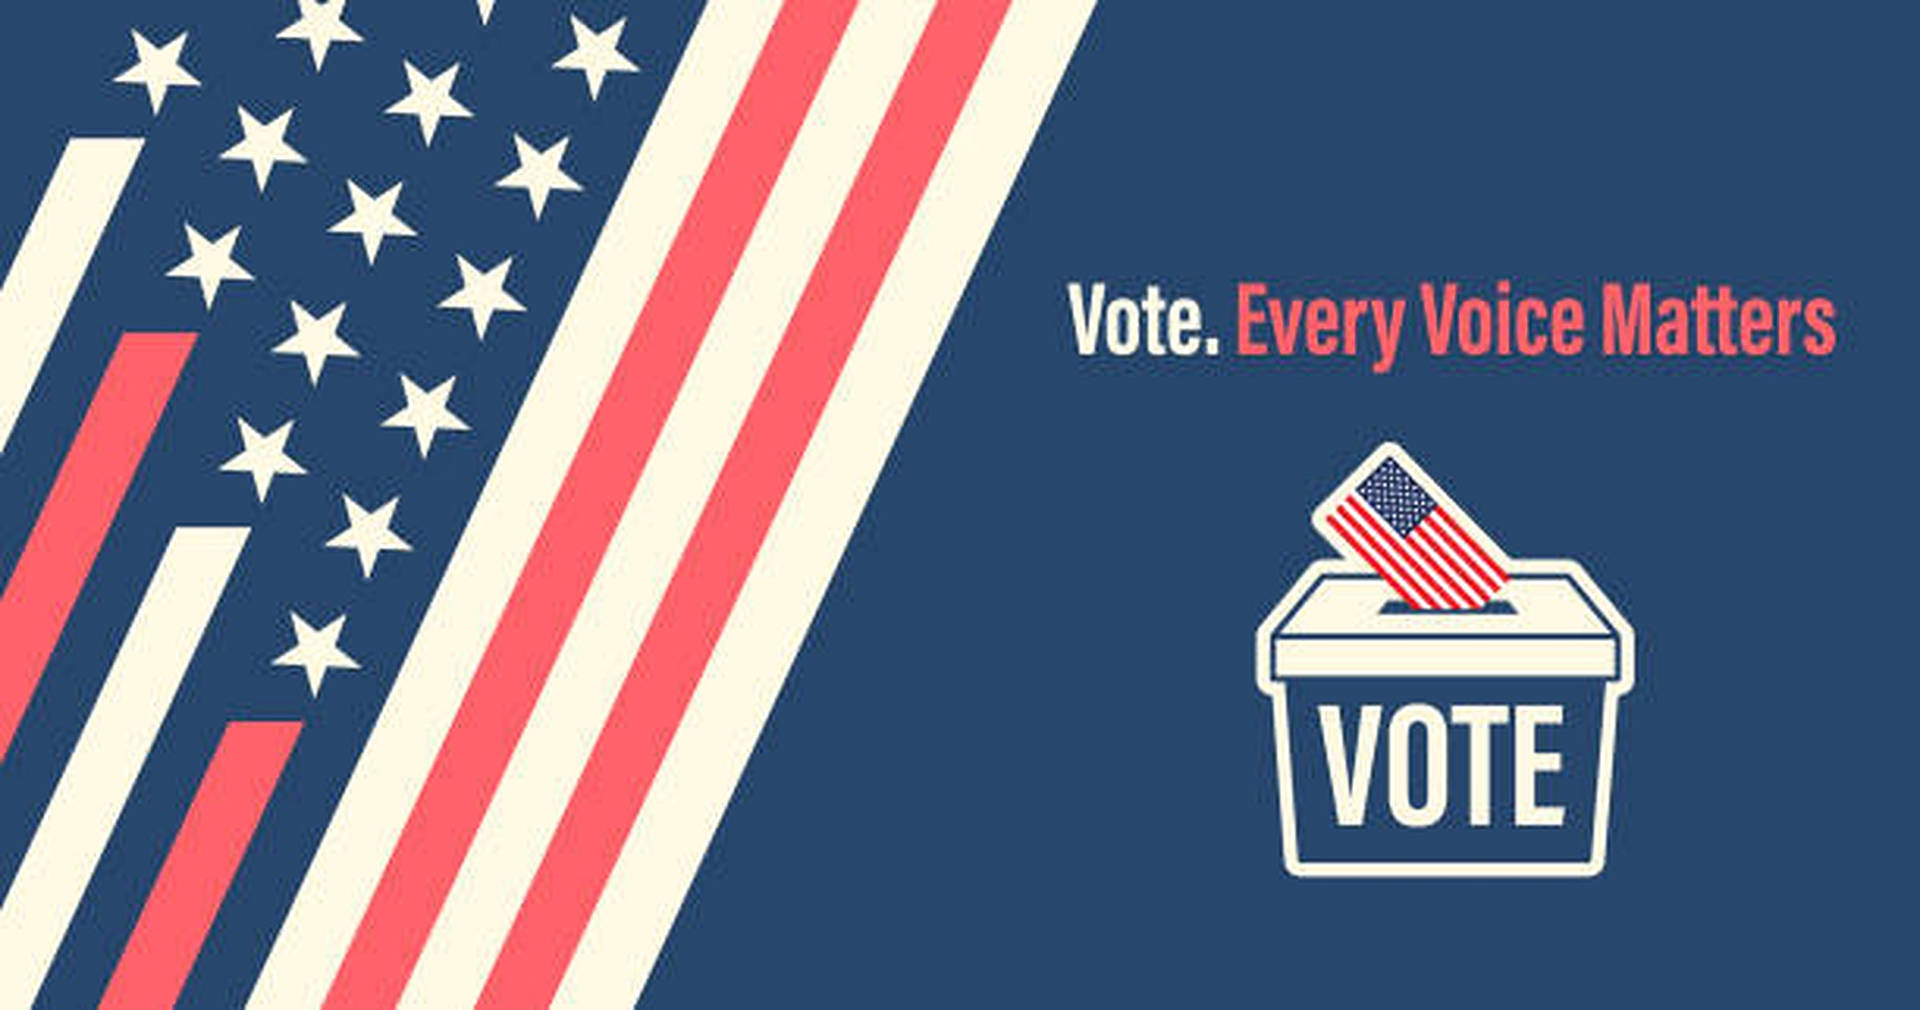 Every Voice Matters Vote Election Wallpaper